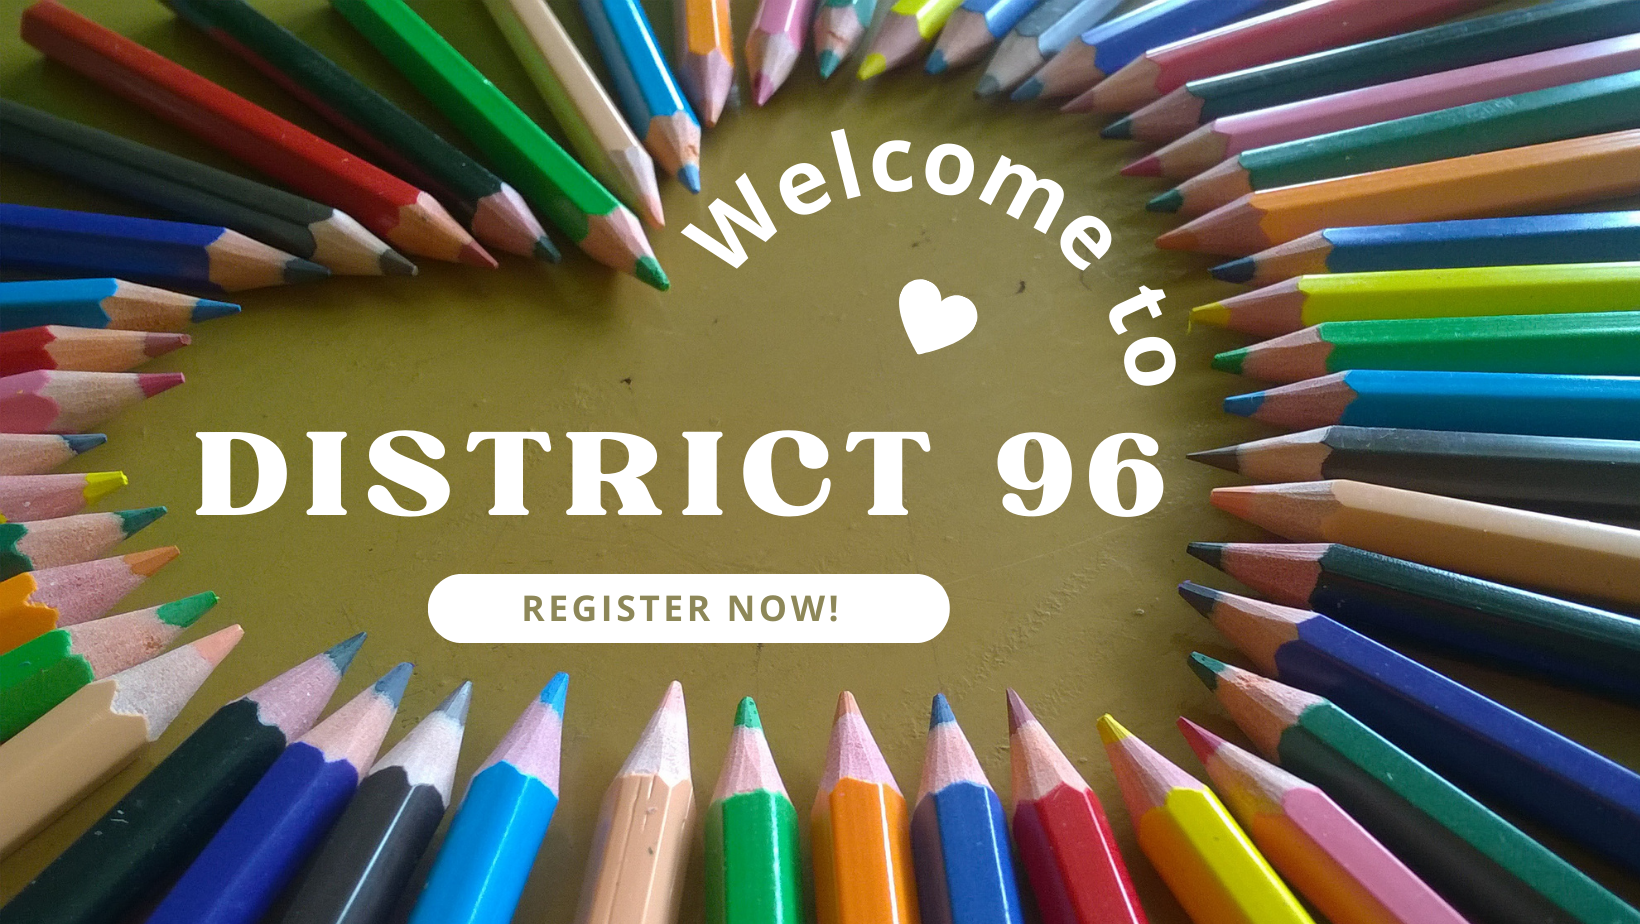 Colored Pencils - Welcome To District 96 banner - Register Now!